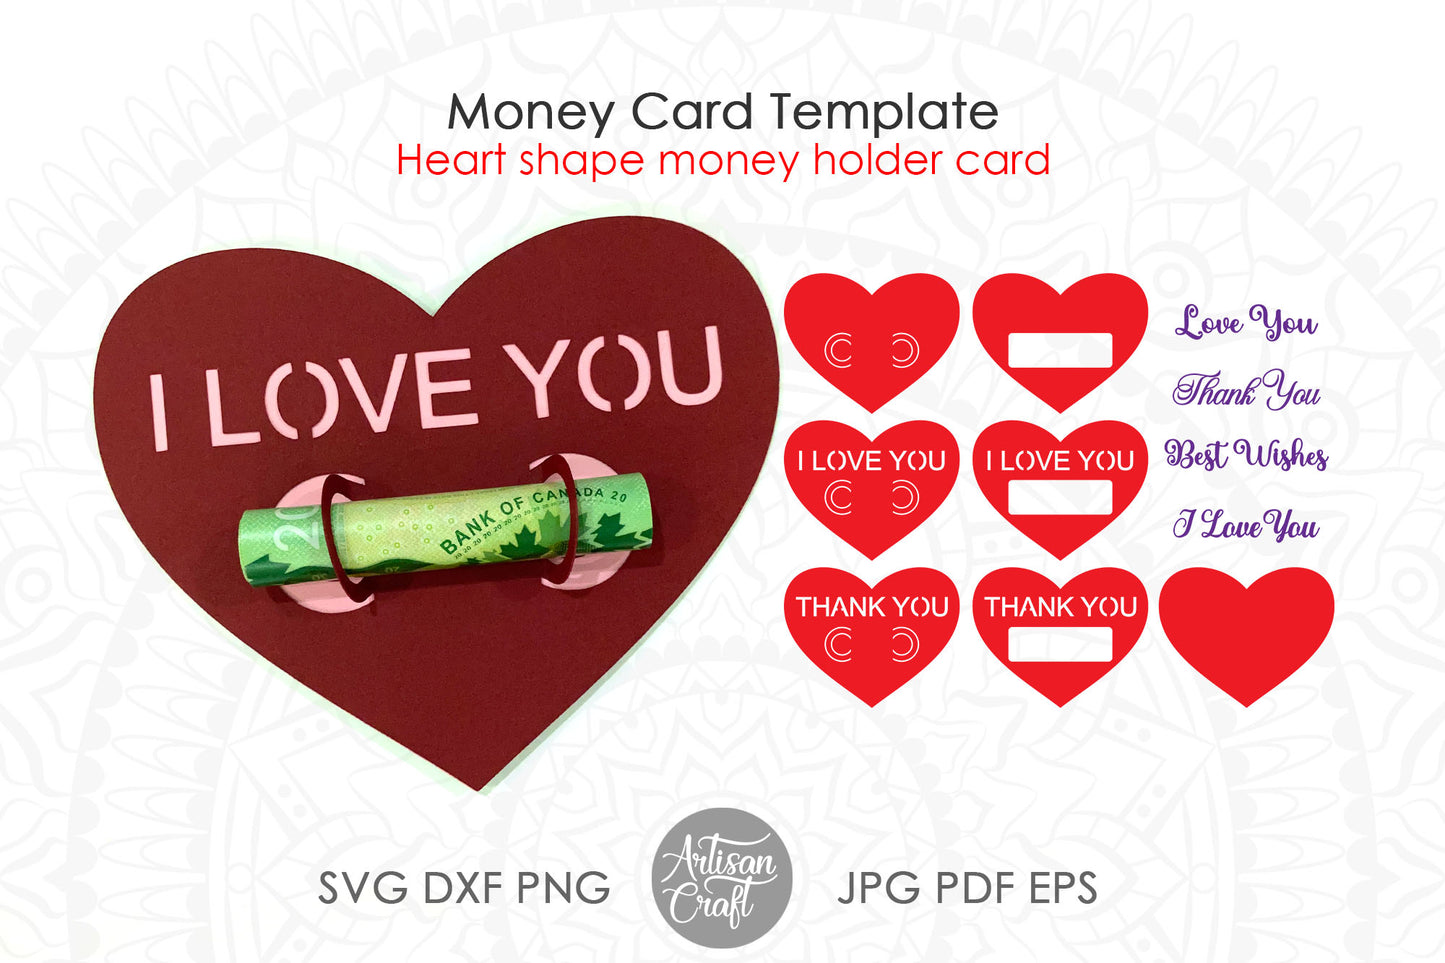 Money card template with heart for Valentines day gifts